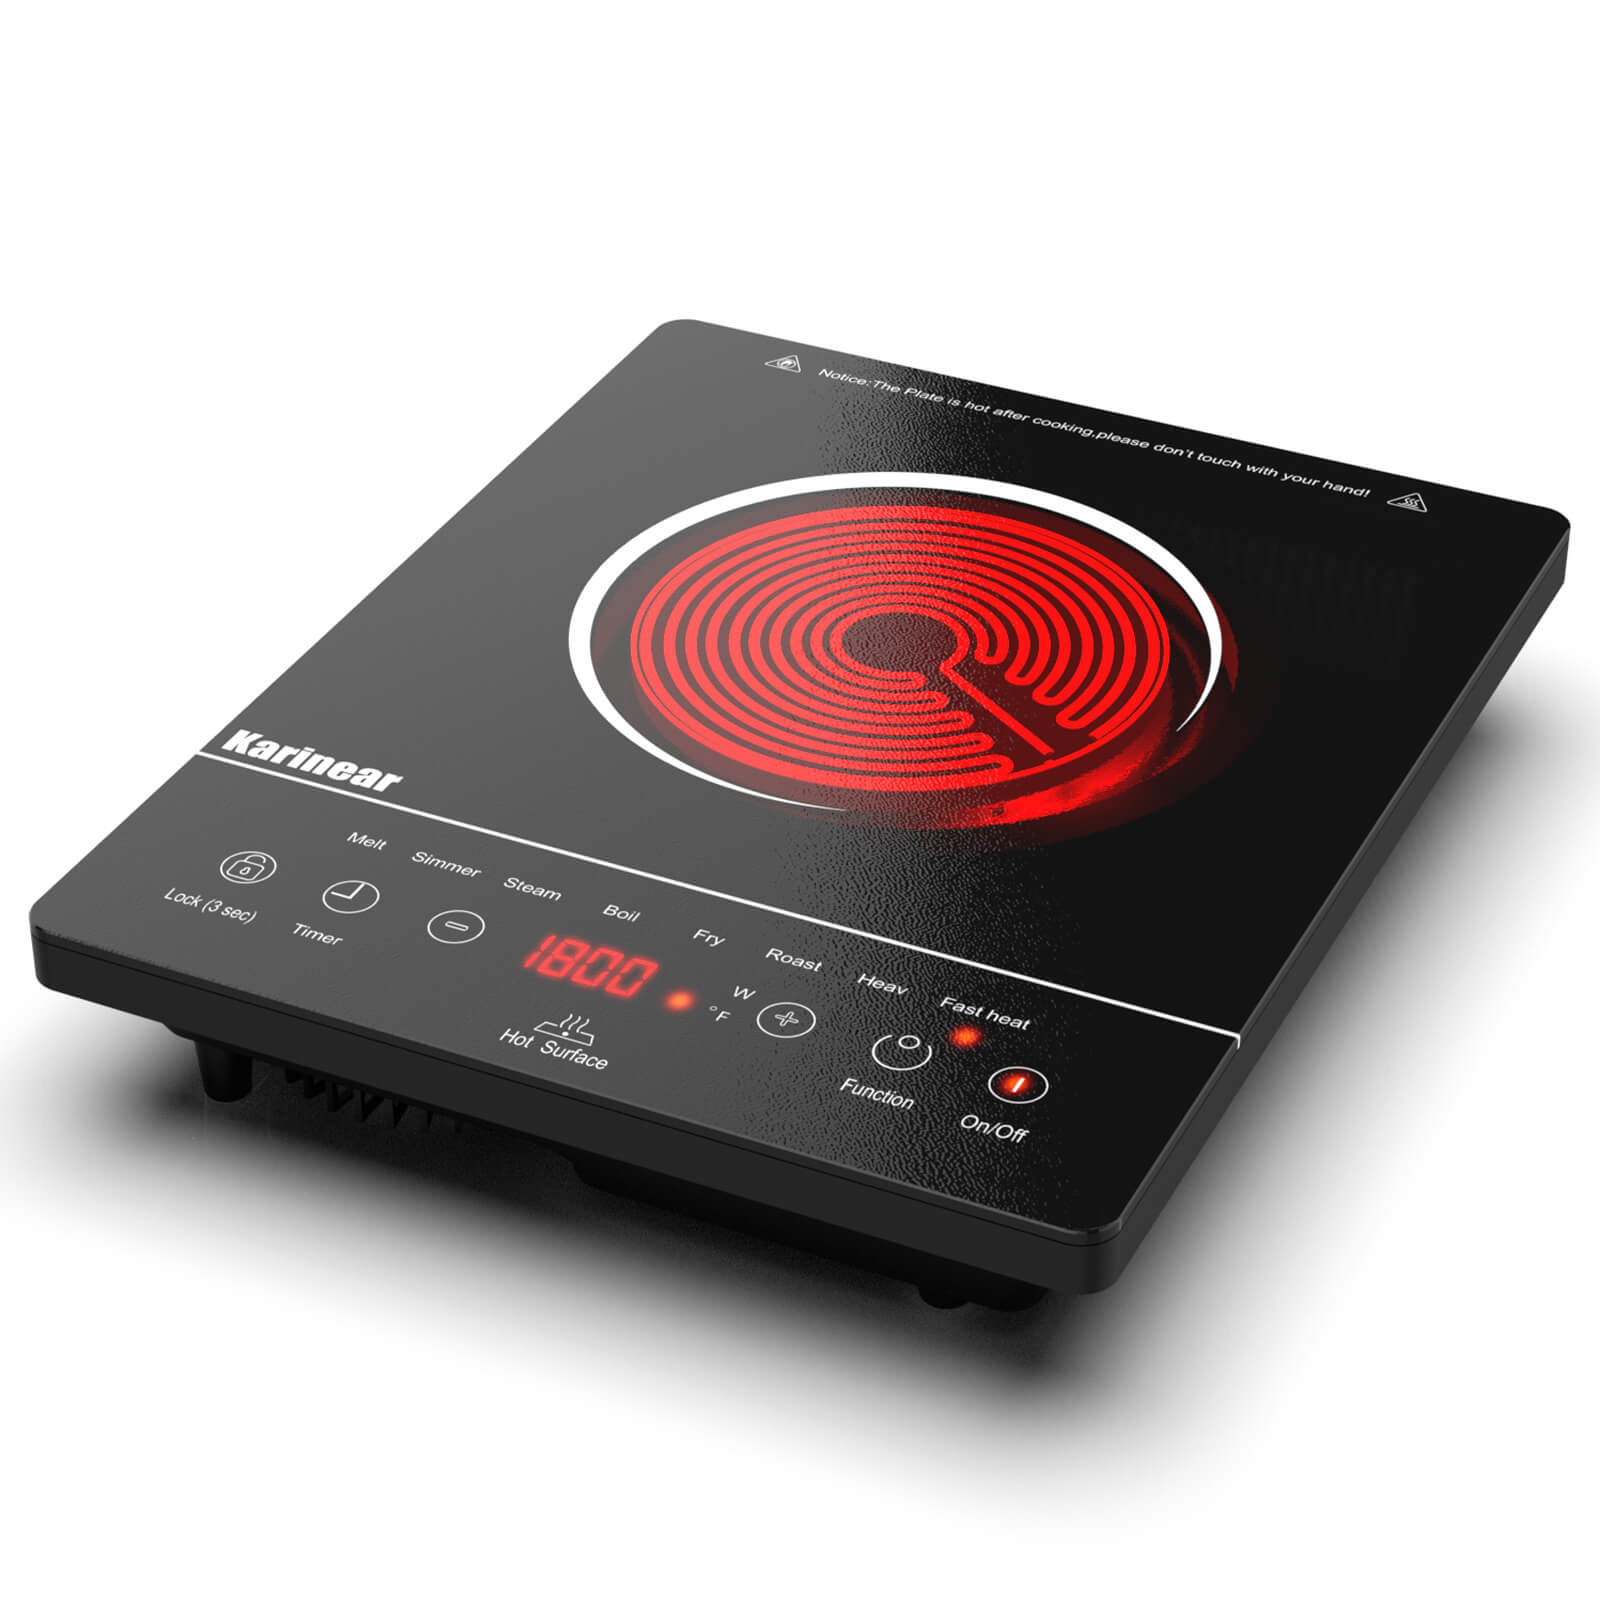  2 Burner Electric Cooktop 110v, 120v Plug In Electric Stove  Top, 12 Inch Built-in Radiant Electric Stove, Electric Ceramic Cooktop with  Child Safety Lock, Timer, Over-Temperature Protection : Appliances